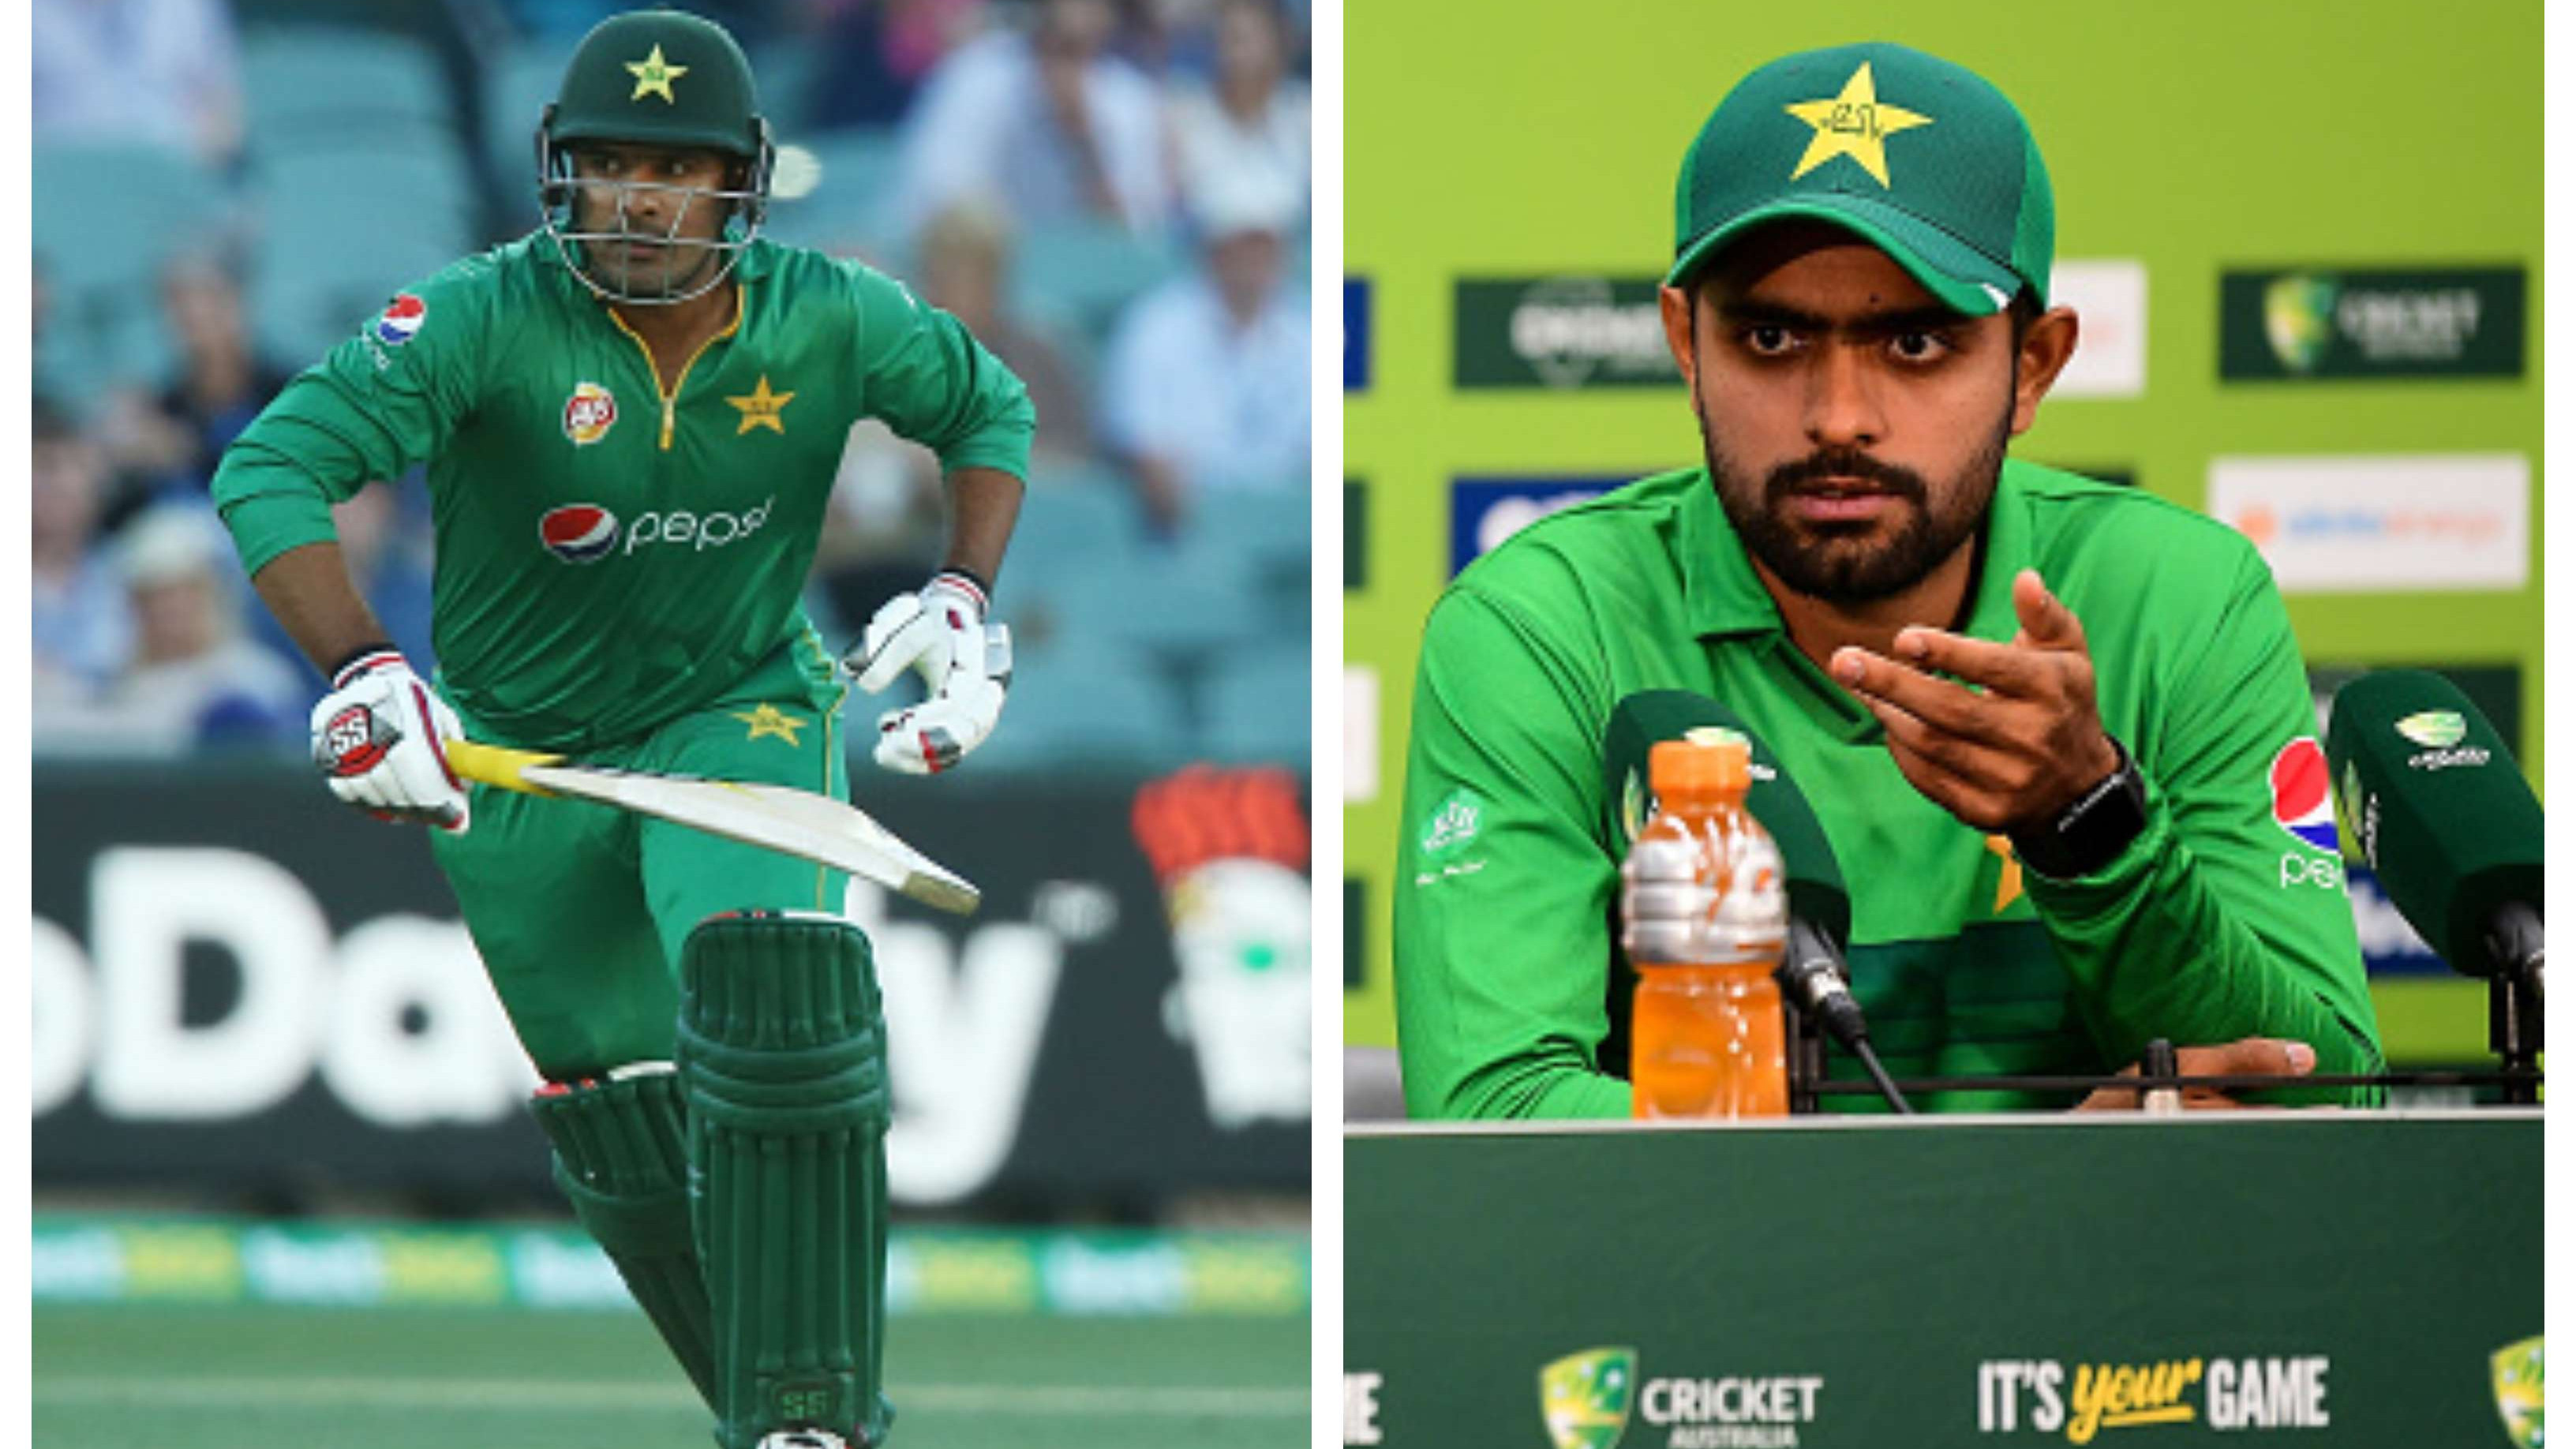 SA v PAK 2021: WATCH – Babar Azam supports Sharjeel Khan’s selection in Pakistan’s T20I squad